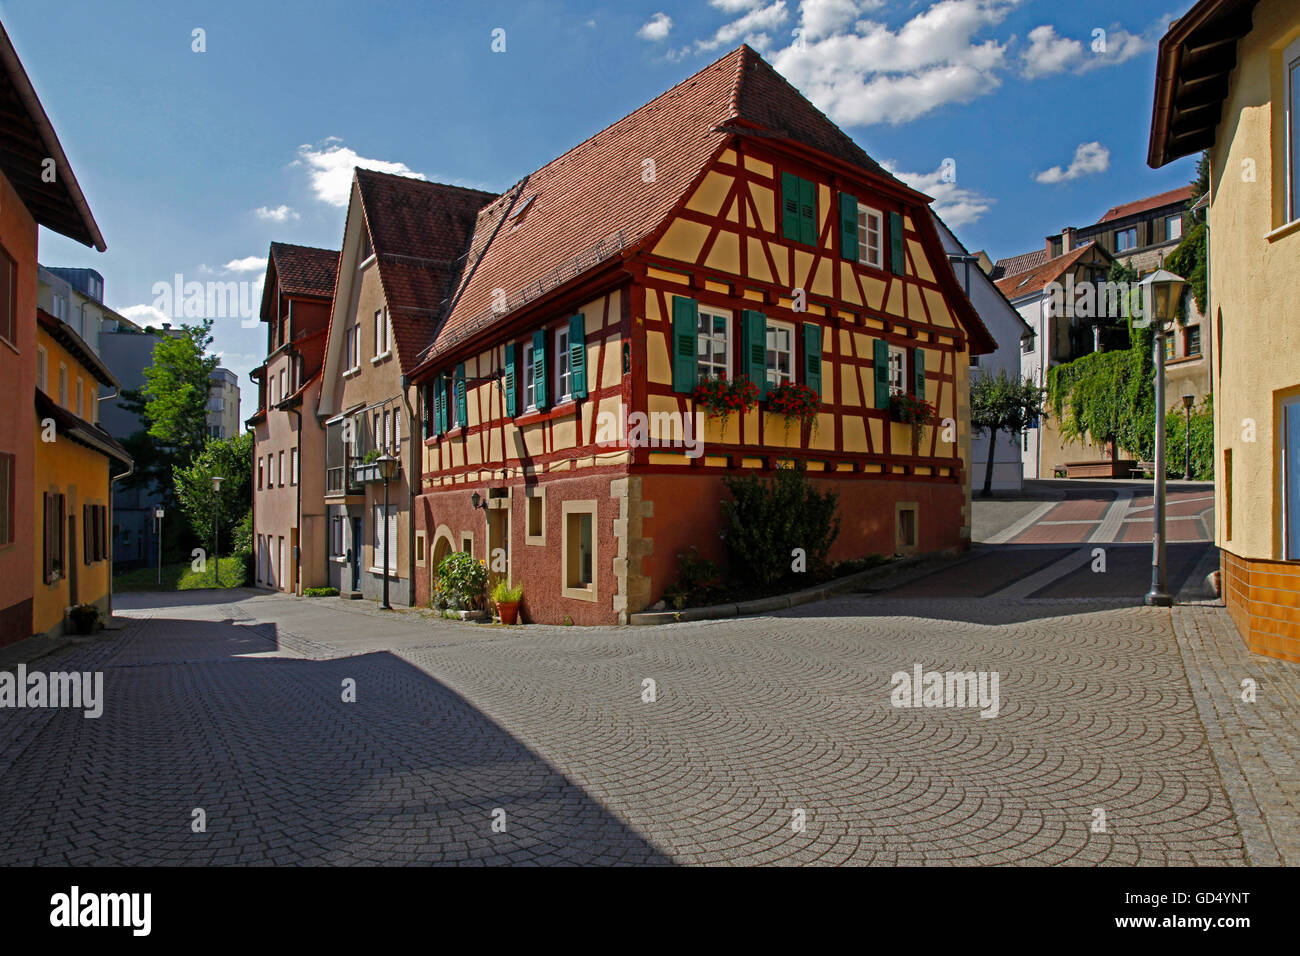 Old Town, half-timbered house, built in 1748, Bretten, Kraichgau, district of Karlsruhe, Baden-Wurttemberg, Germany Stock Photo